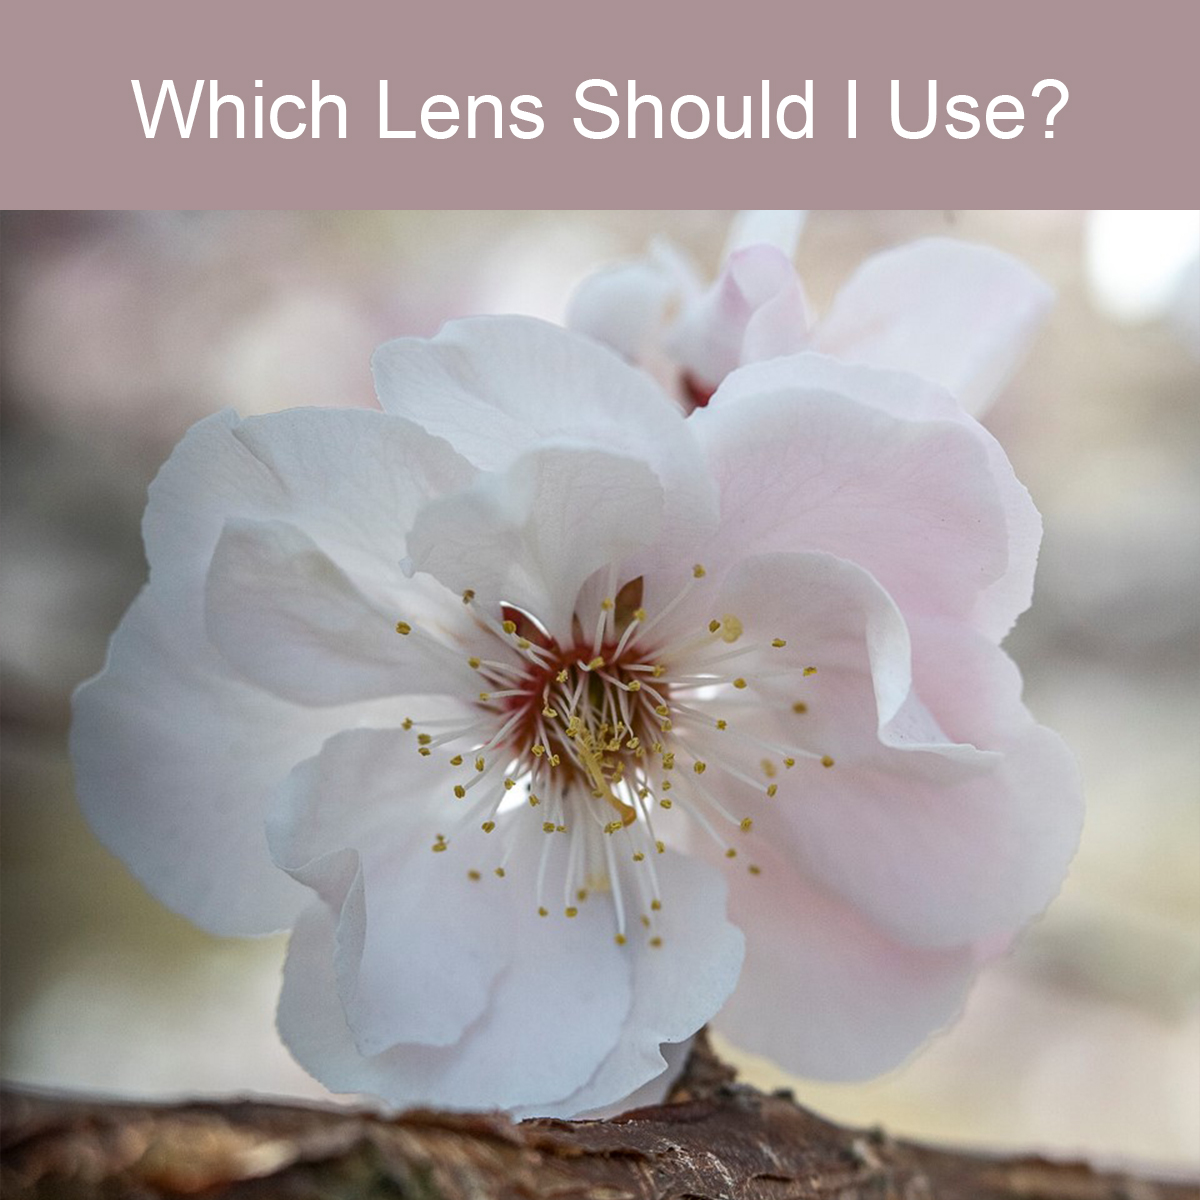 Which Lens Should I Use?